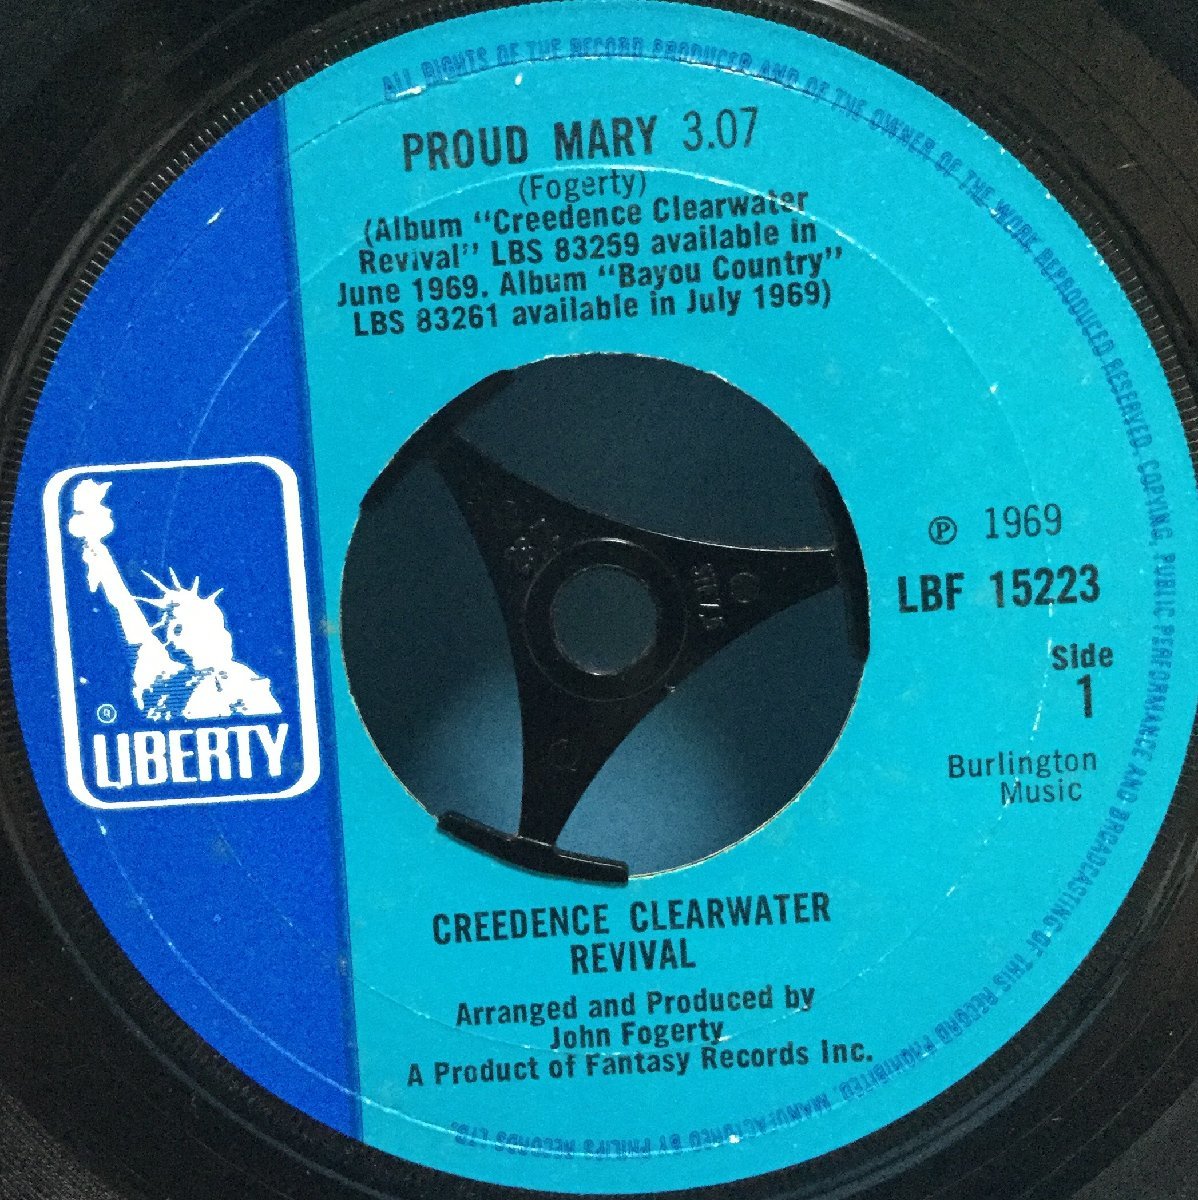 EP 洋楽 Creedence Clearwater Revival / Proud Mary 英盤_画像3